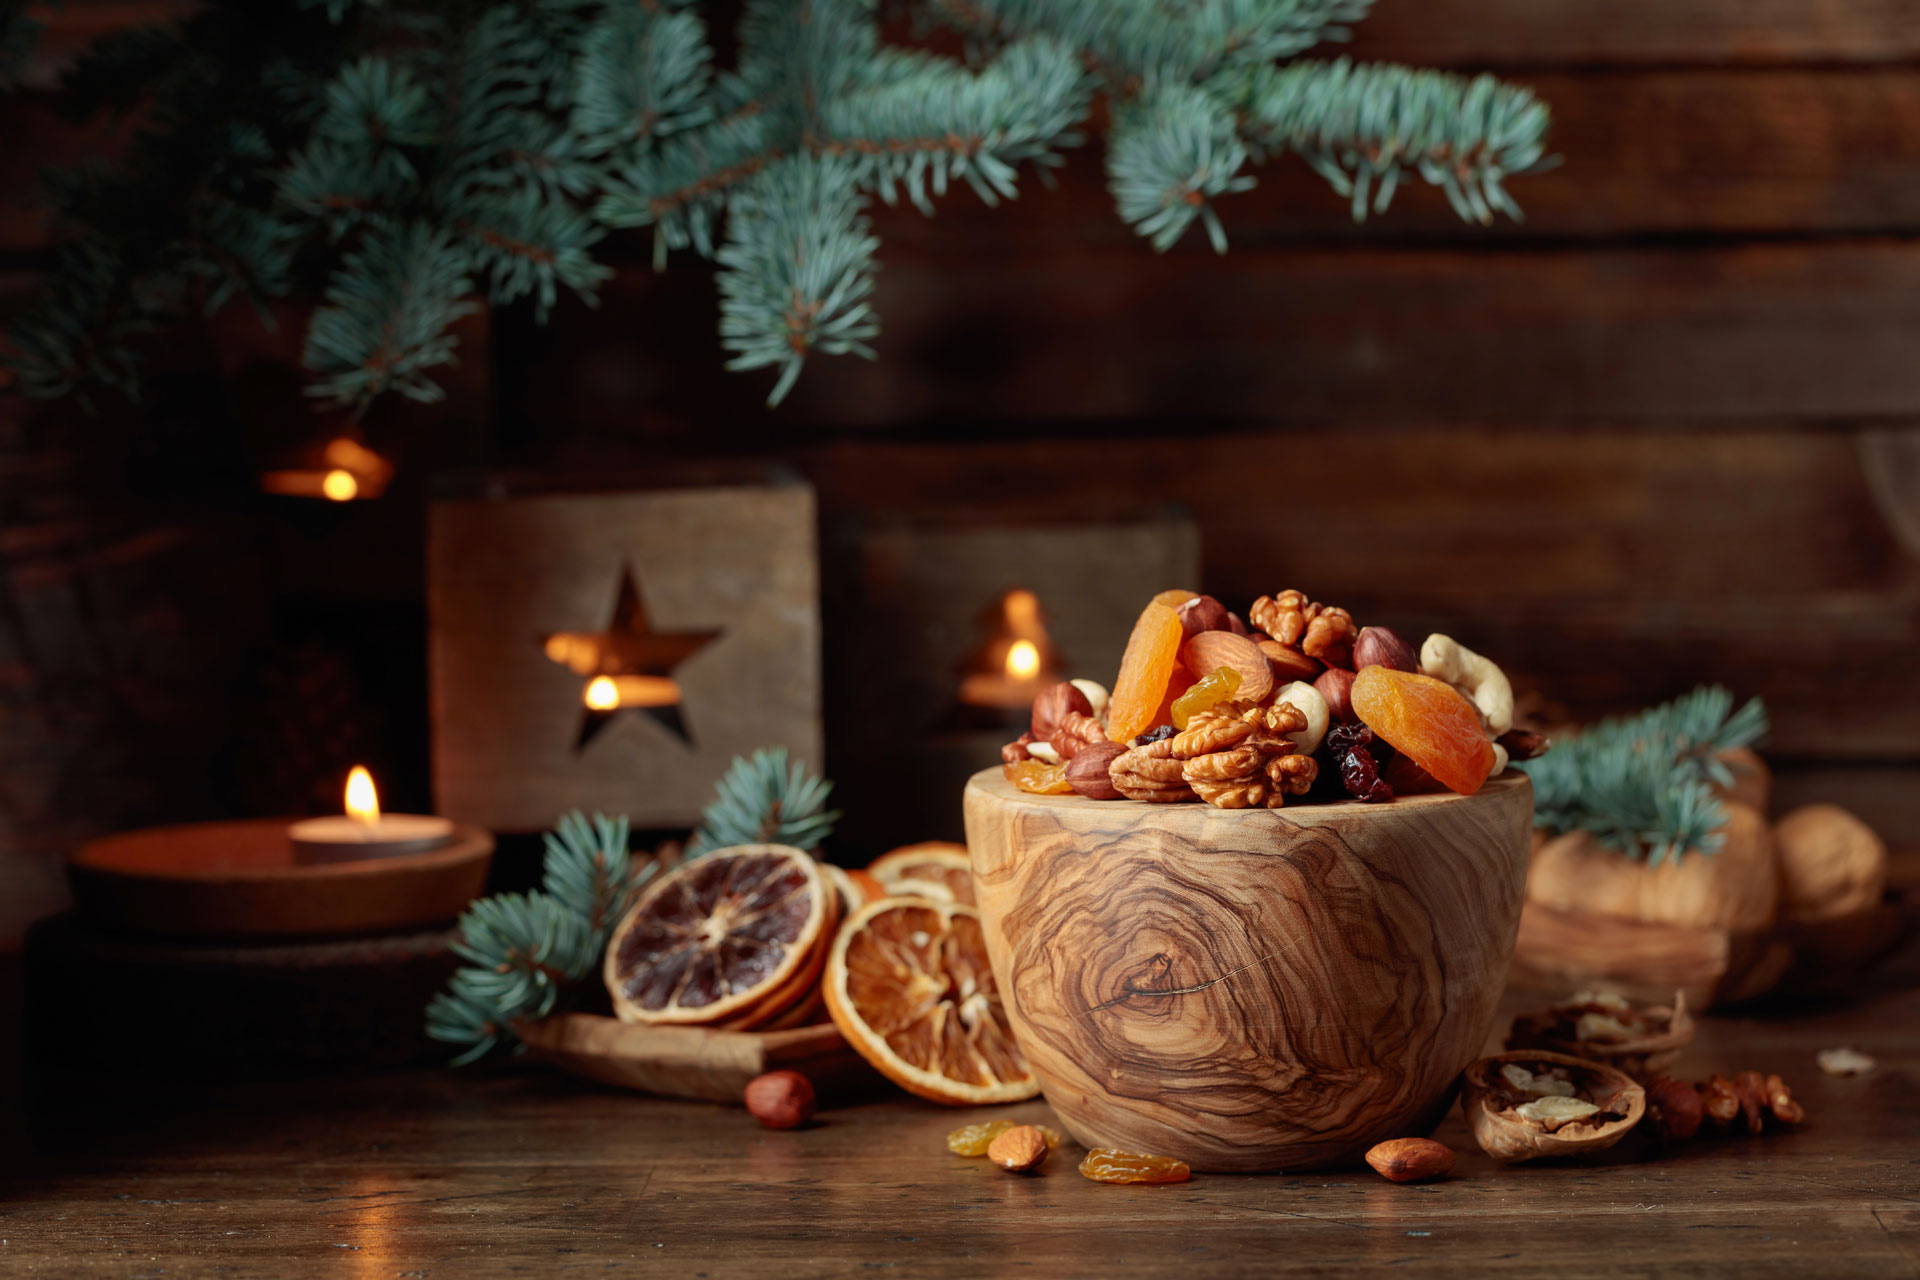 A Nutritionist’s Guide To Healthy Christmas Snacking